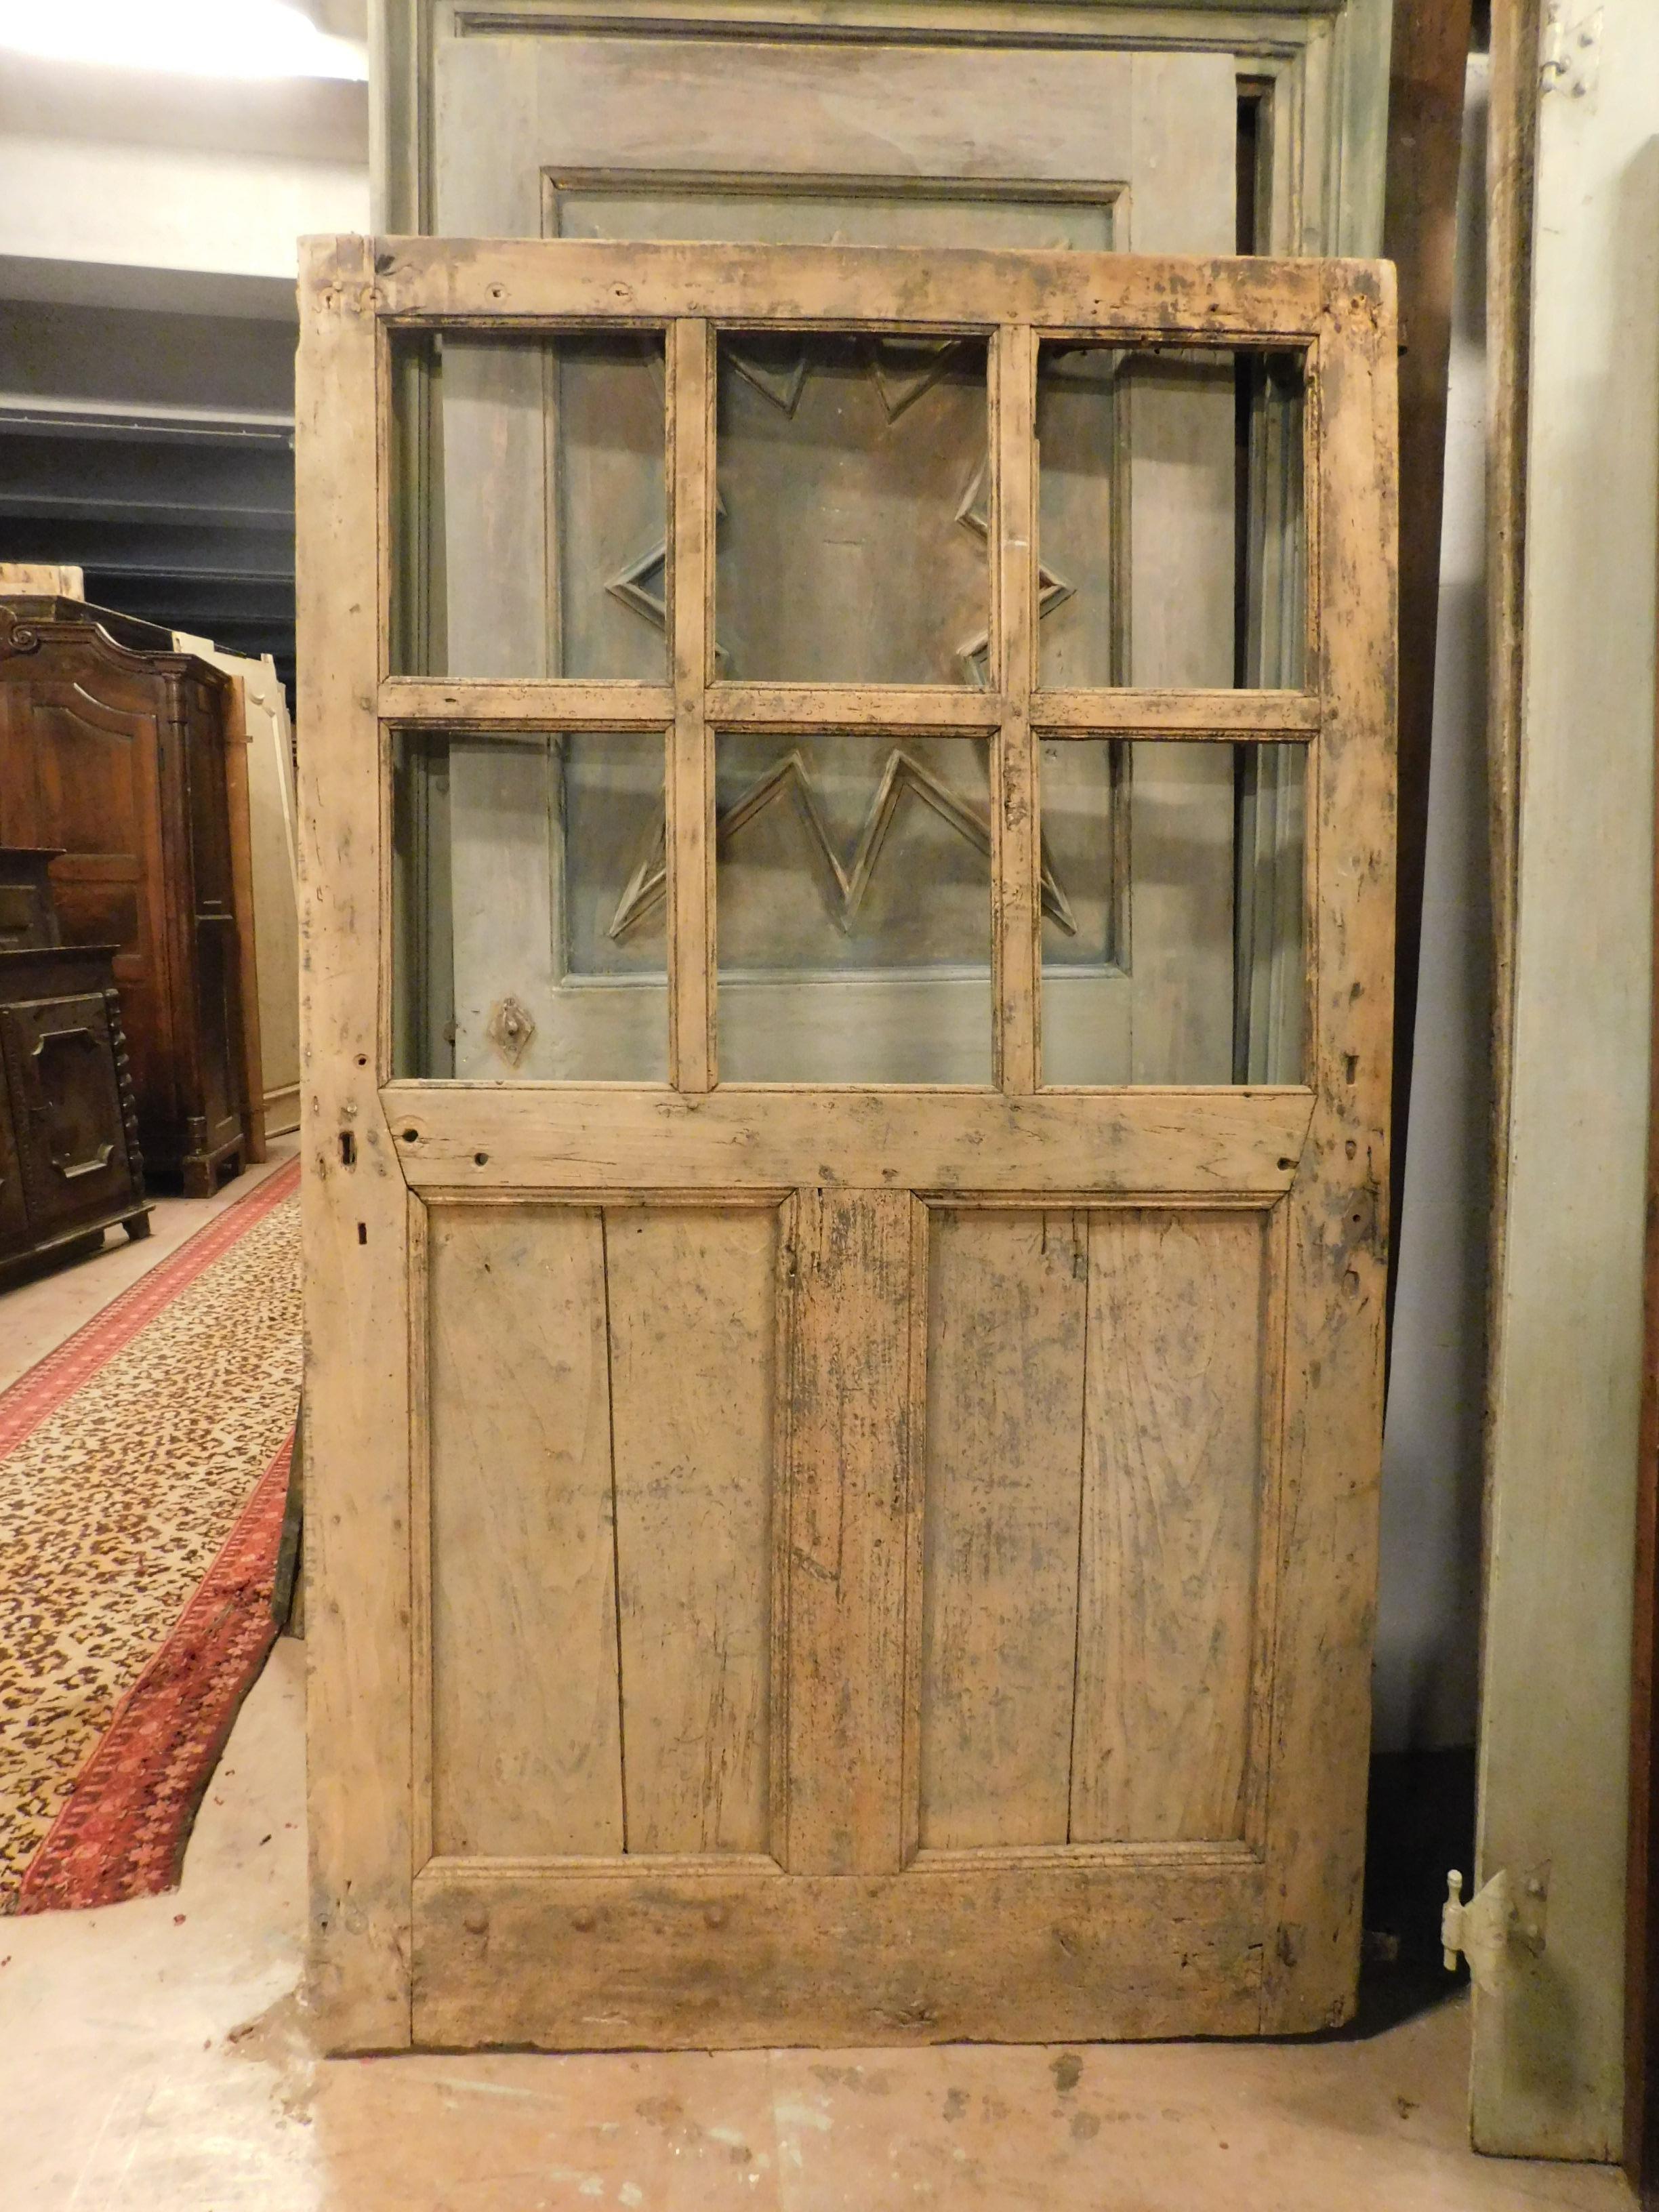 Vintage antique glass door in poplar wood, without glasses and Minimamante to be restored as seen in the photo, built and sculpted in the panels completely by hand, beautiful patina, built in the 19th century in Italy.
Currently it would have push